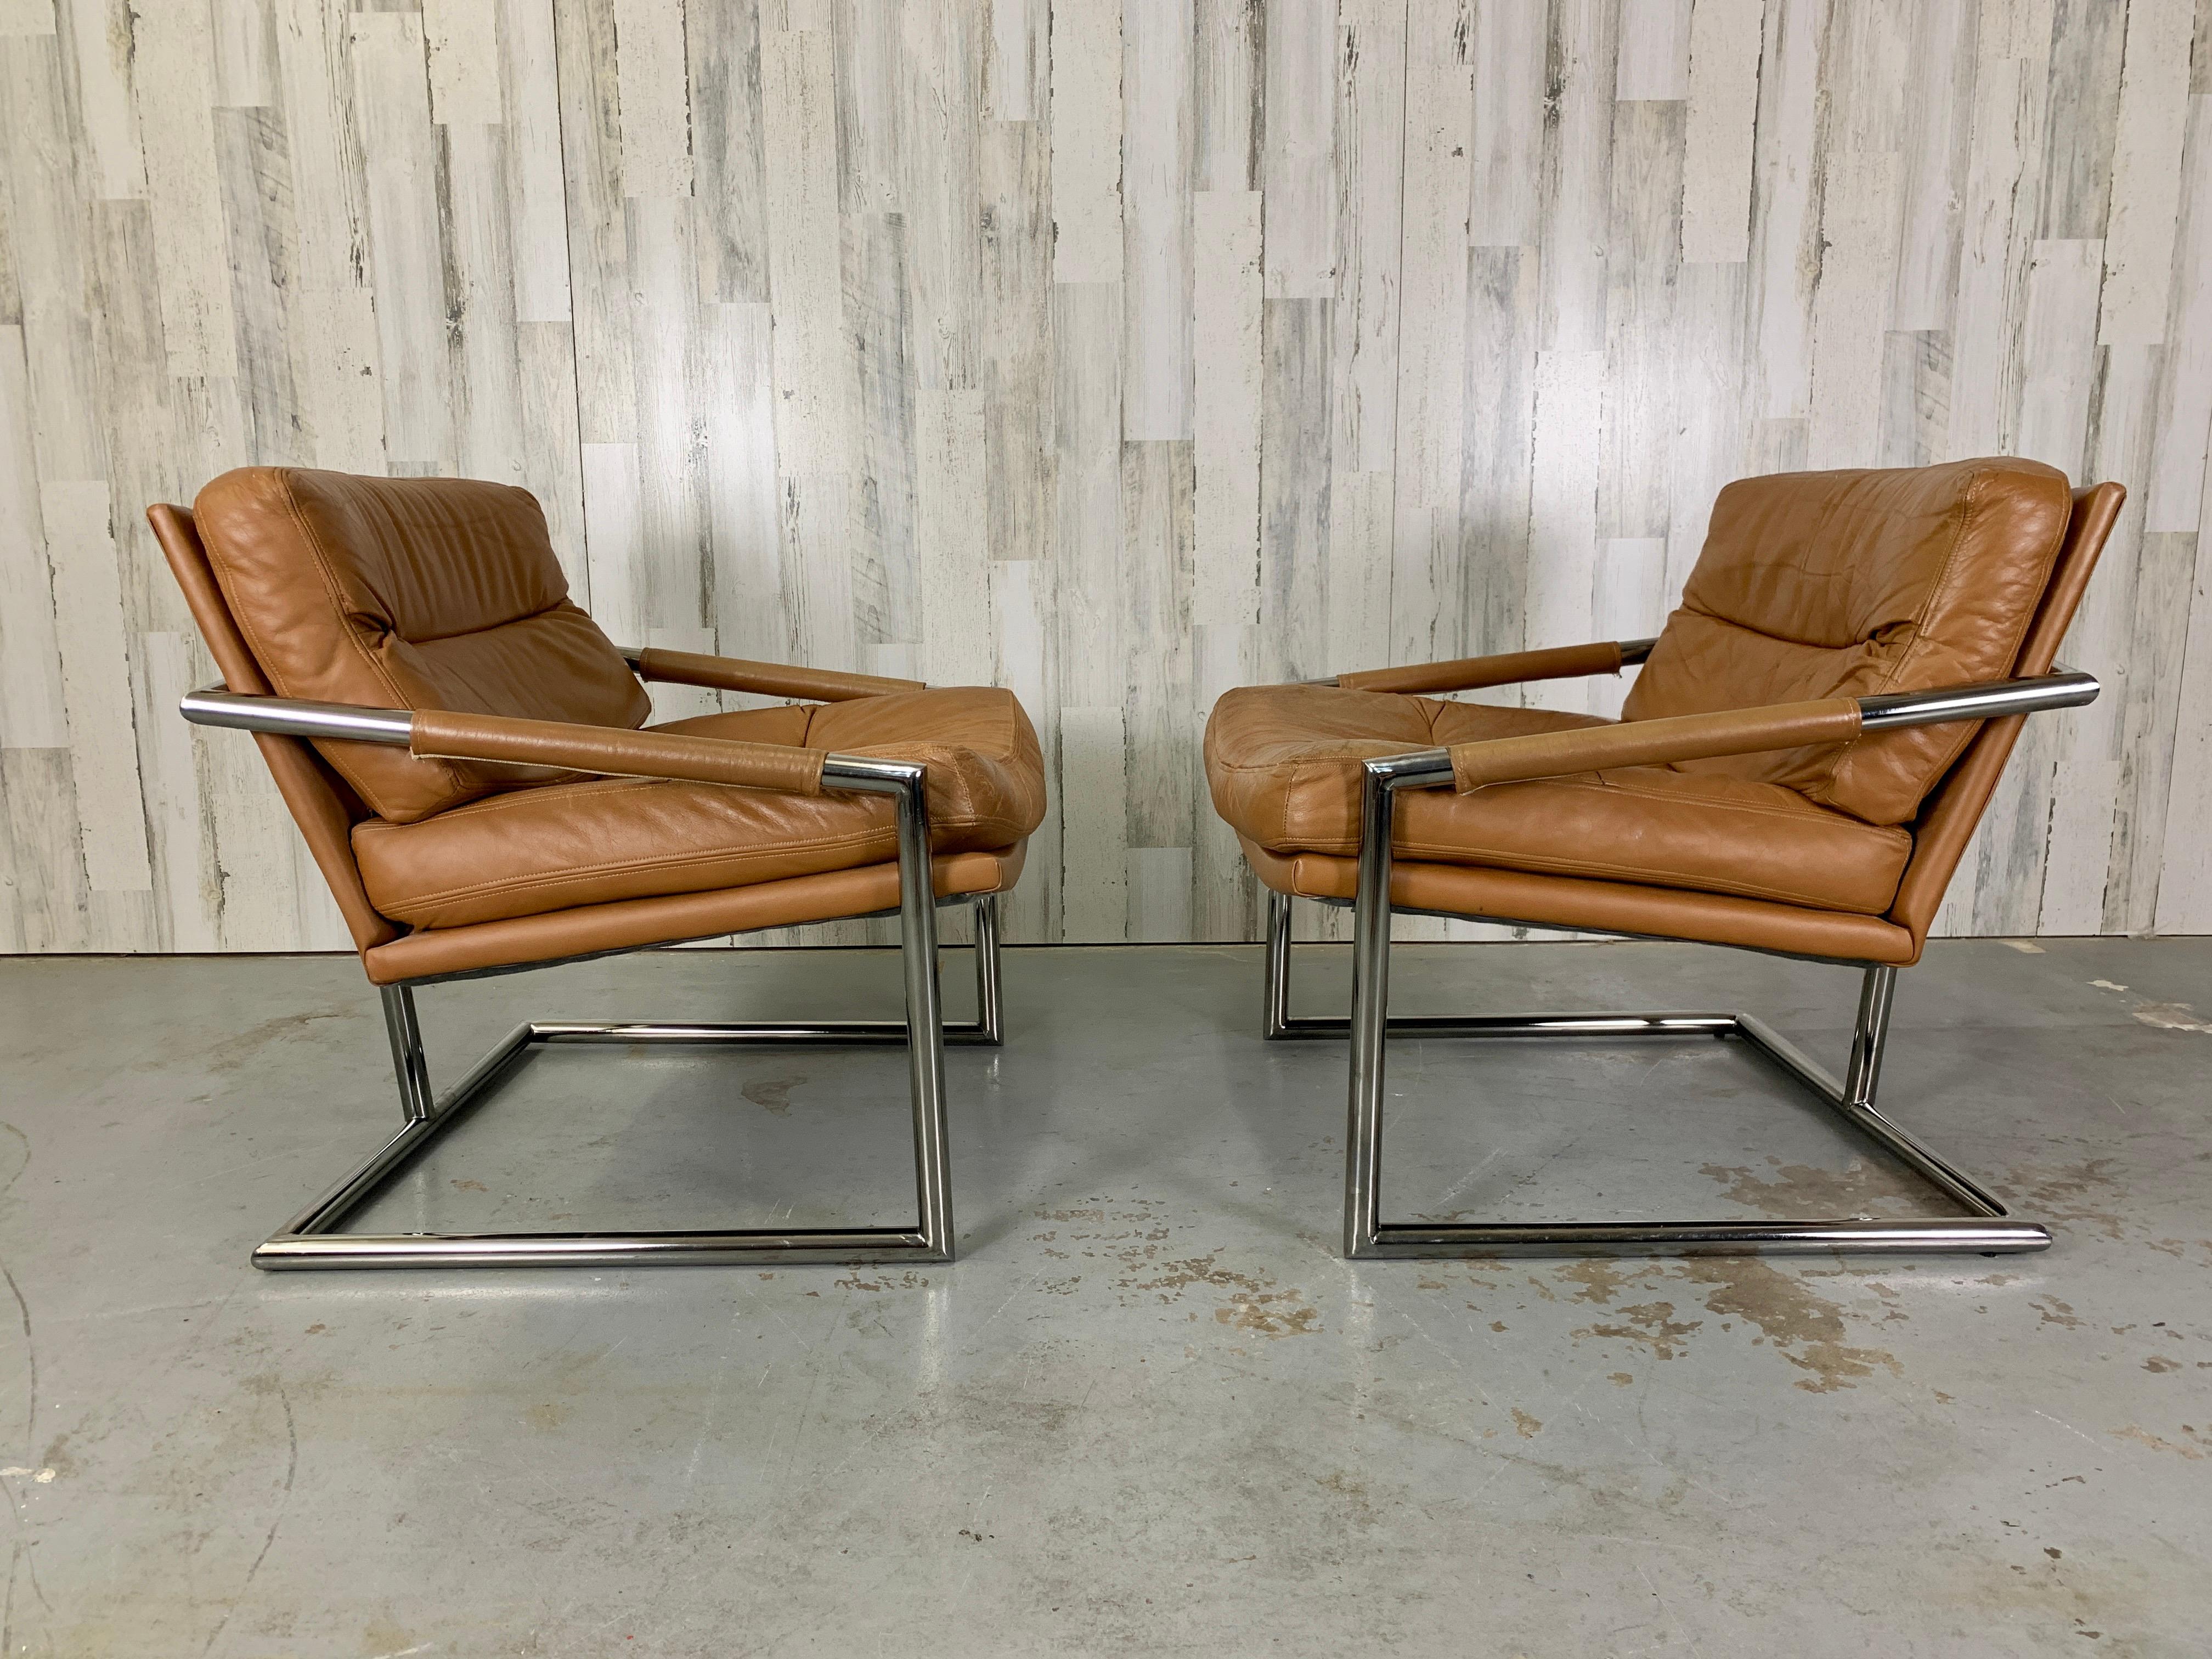 20th Century Milo Baughman Style Chrome & Leather Lounge Chairs